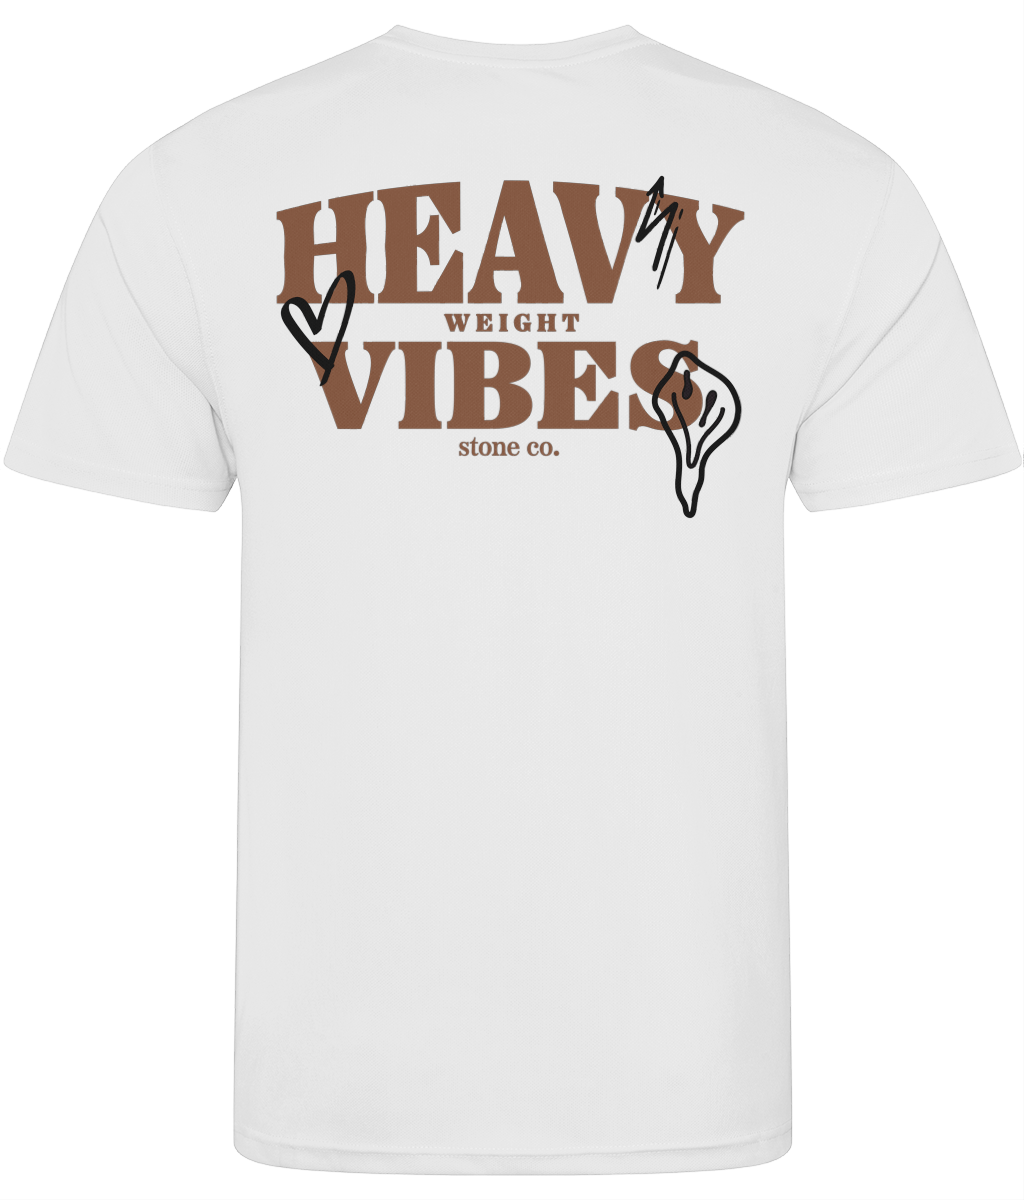 Heavy vibes active t-shirt